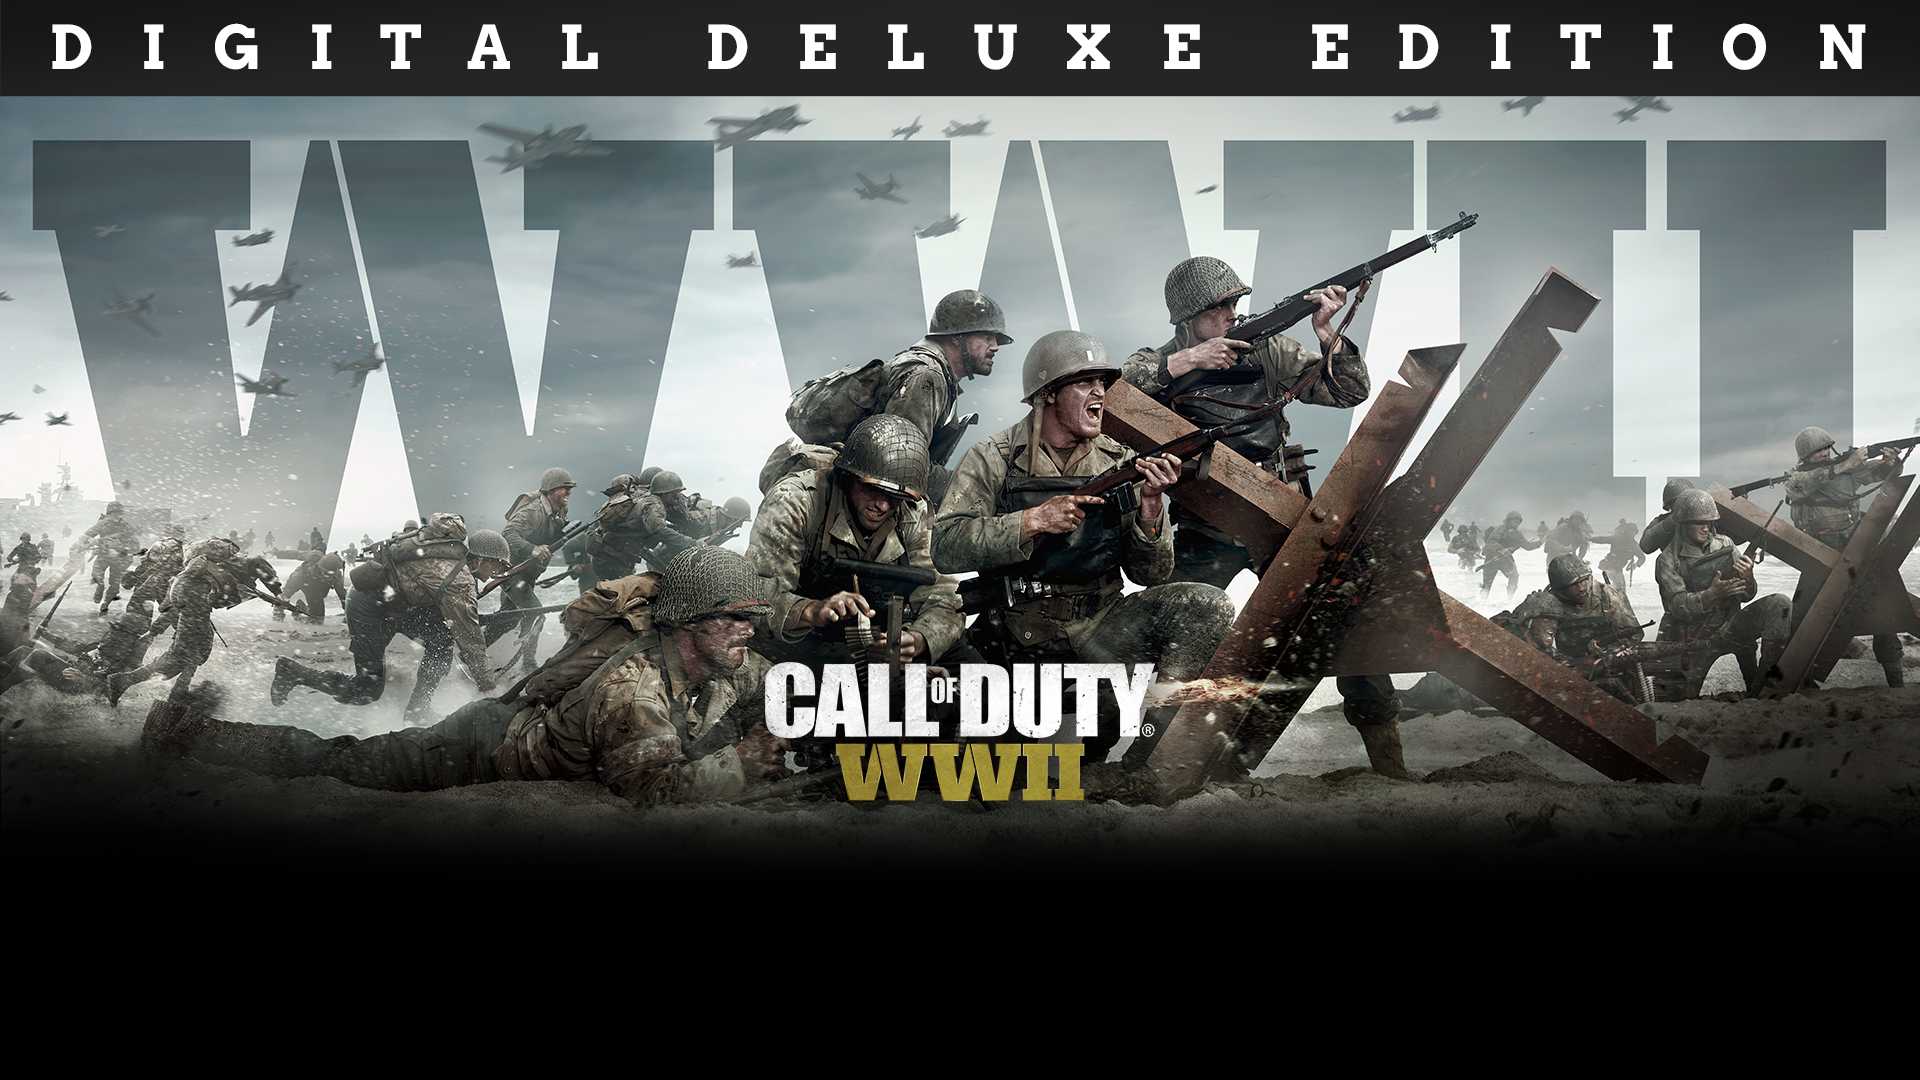 Call of Duty®: WWII - The War Machine: DLC Pack 2